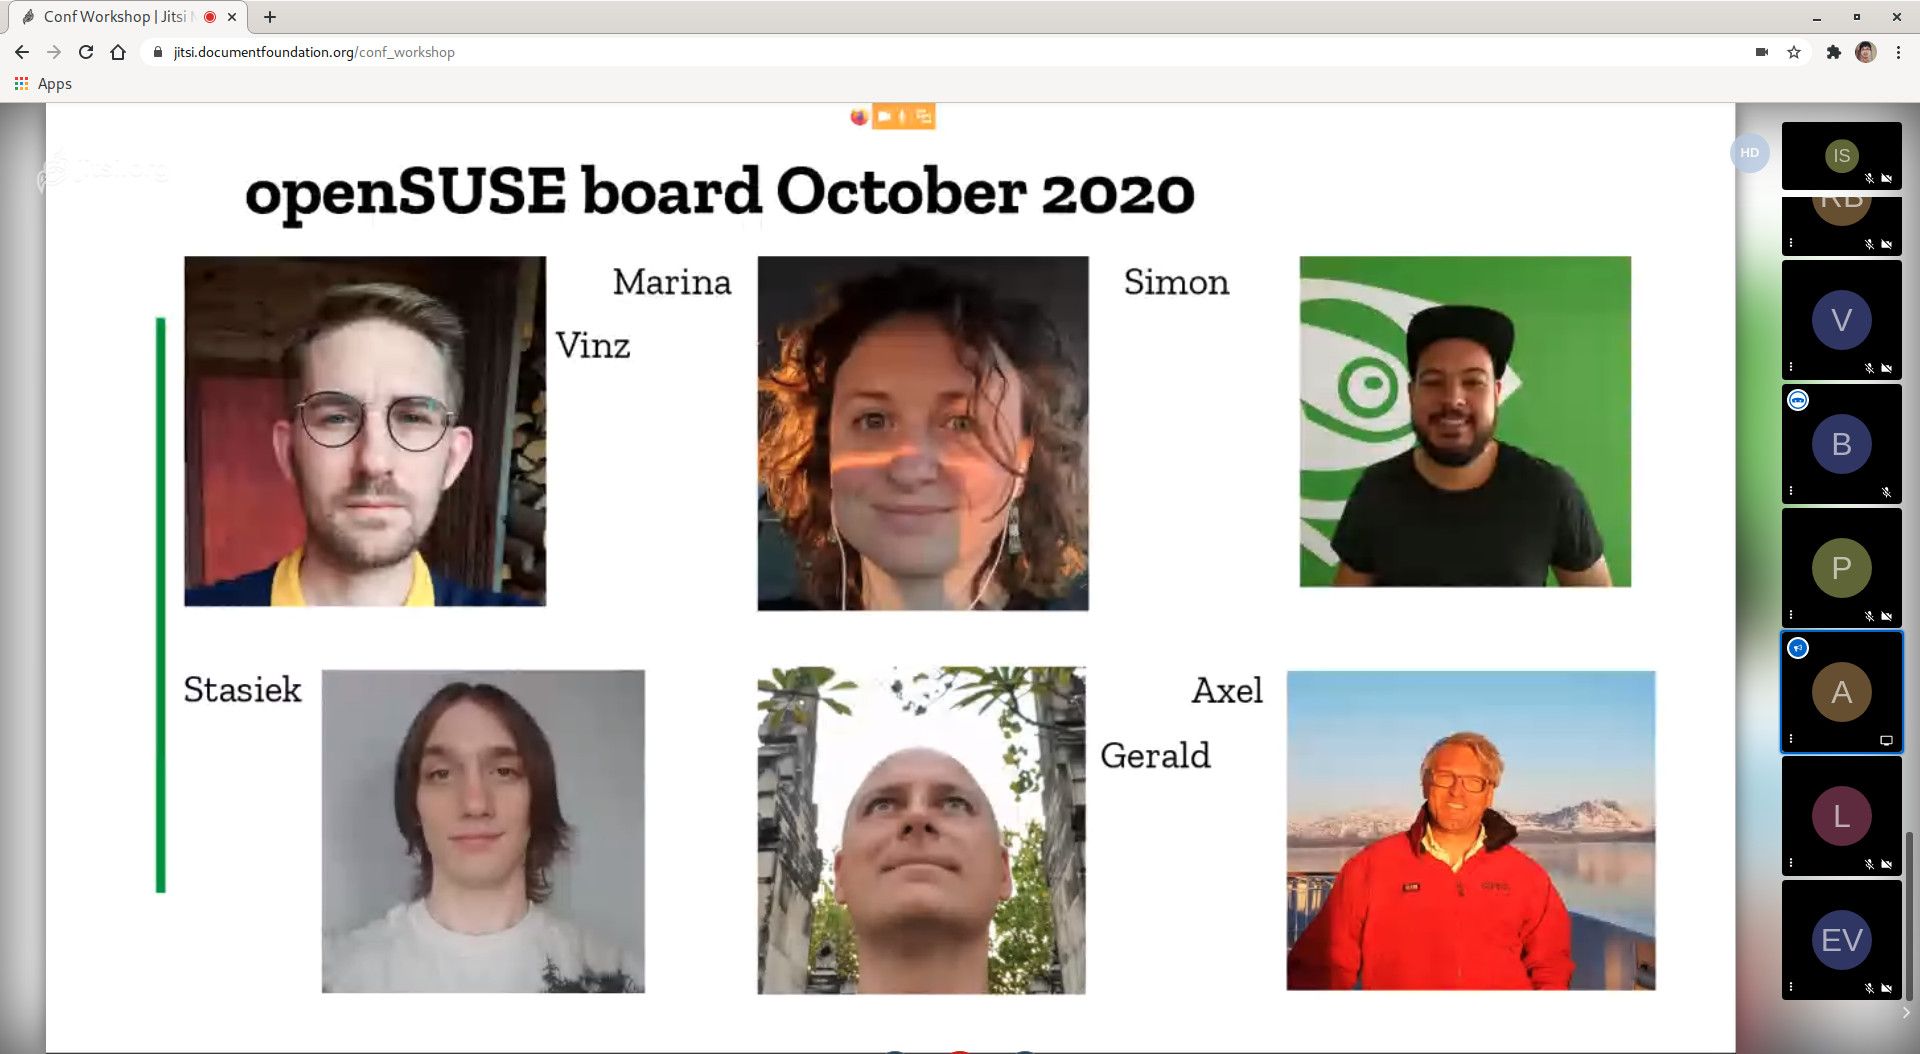 openSUSE Board - October 2020